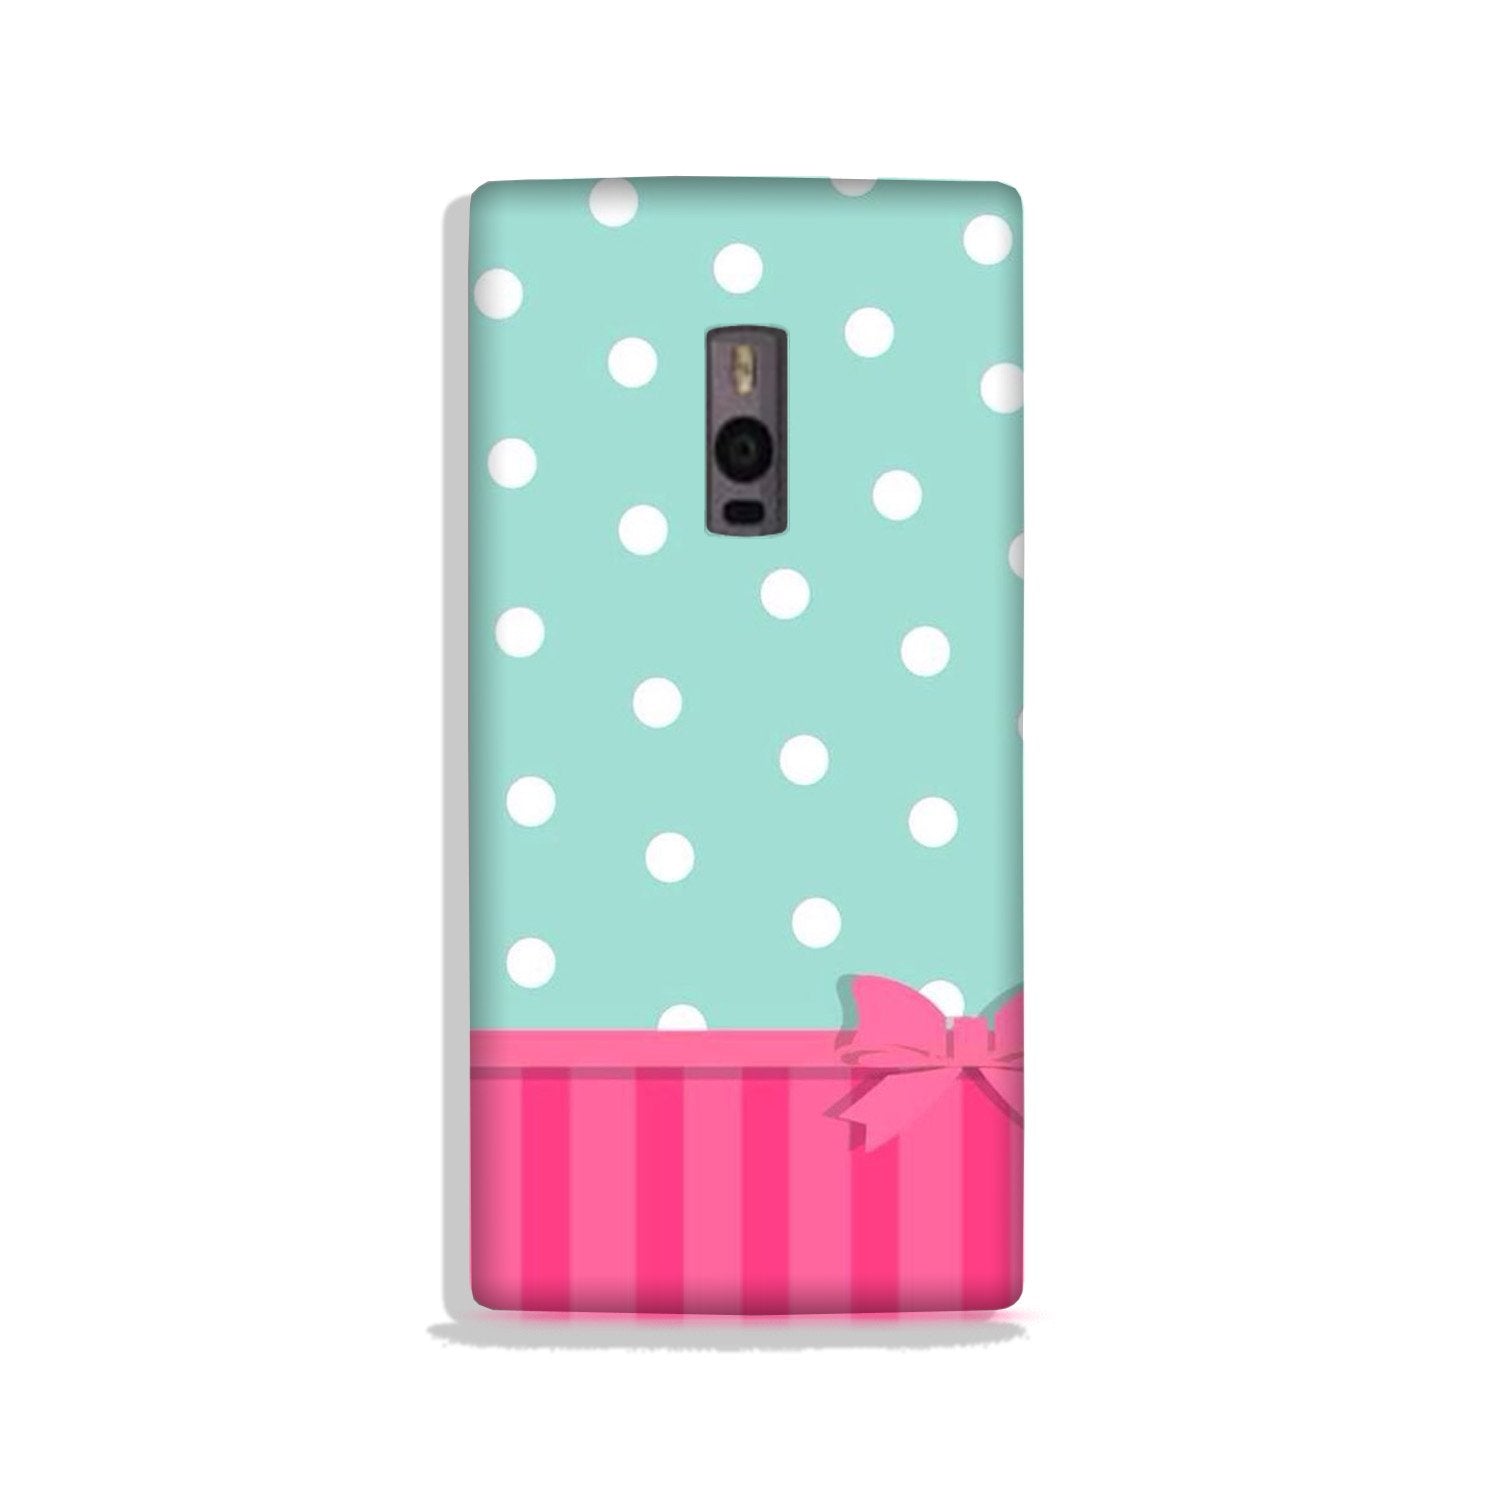 Gift Wrap Case for OnePlus 2